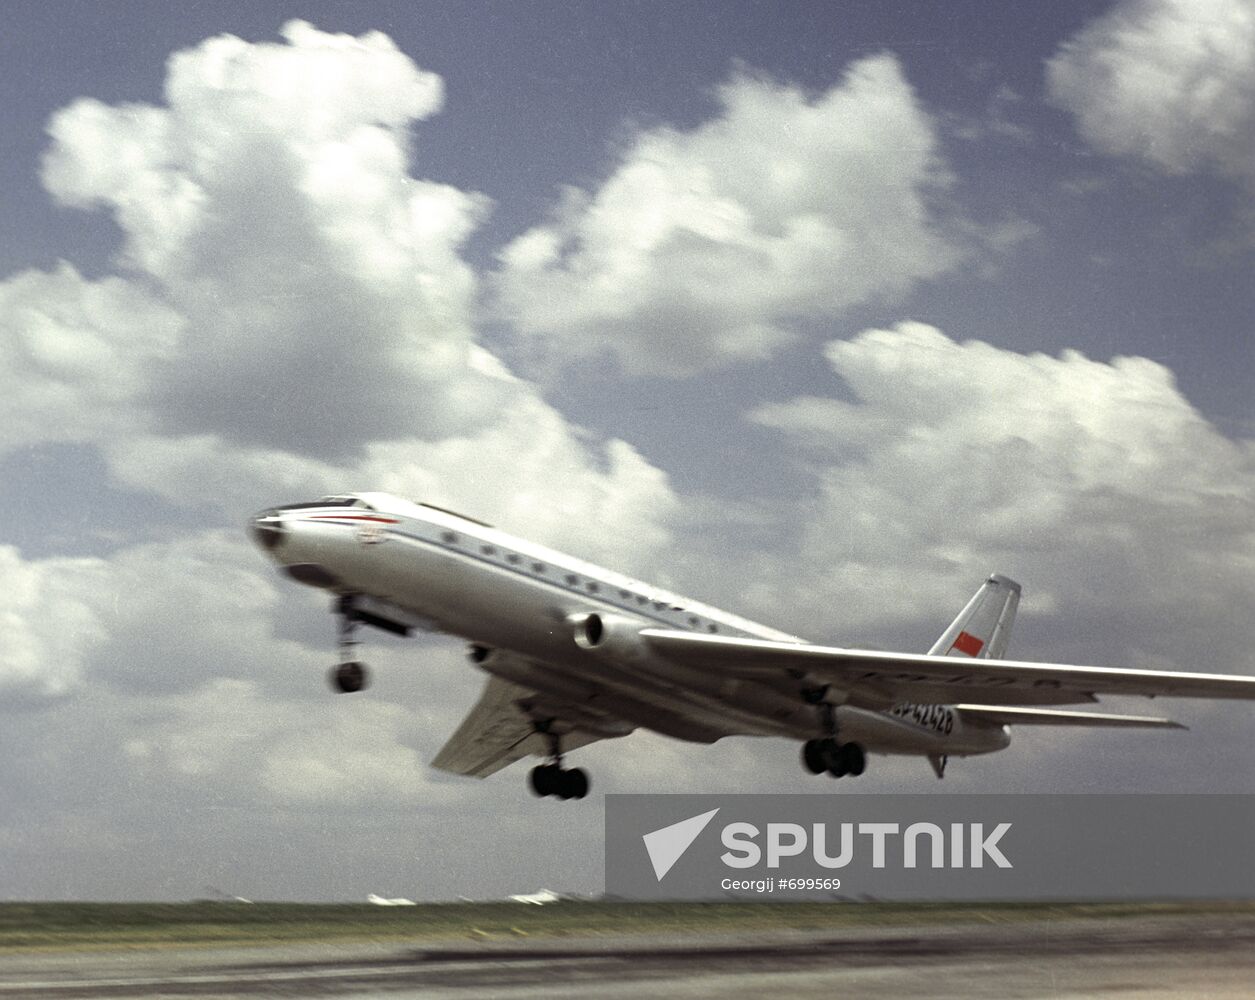 Tupolev 104 aircraft taking off